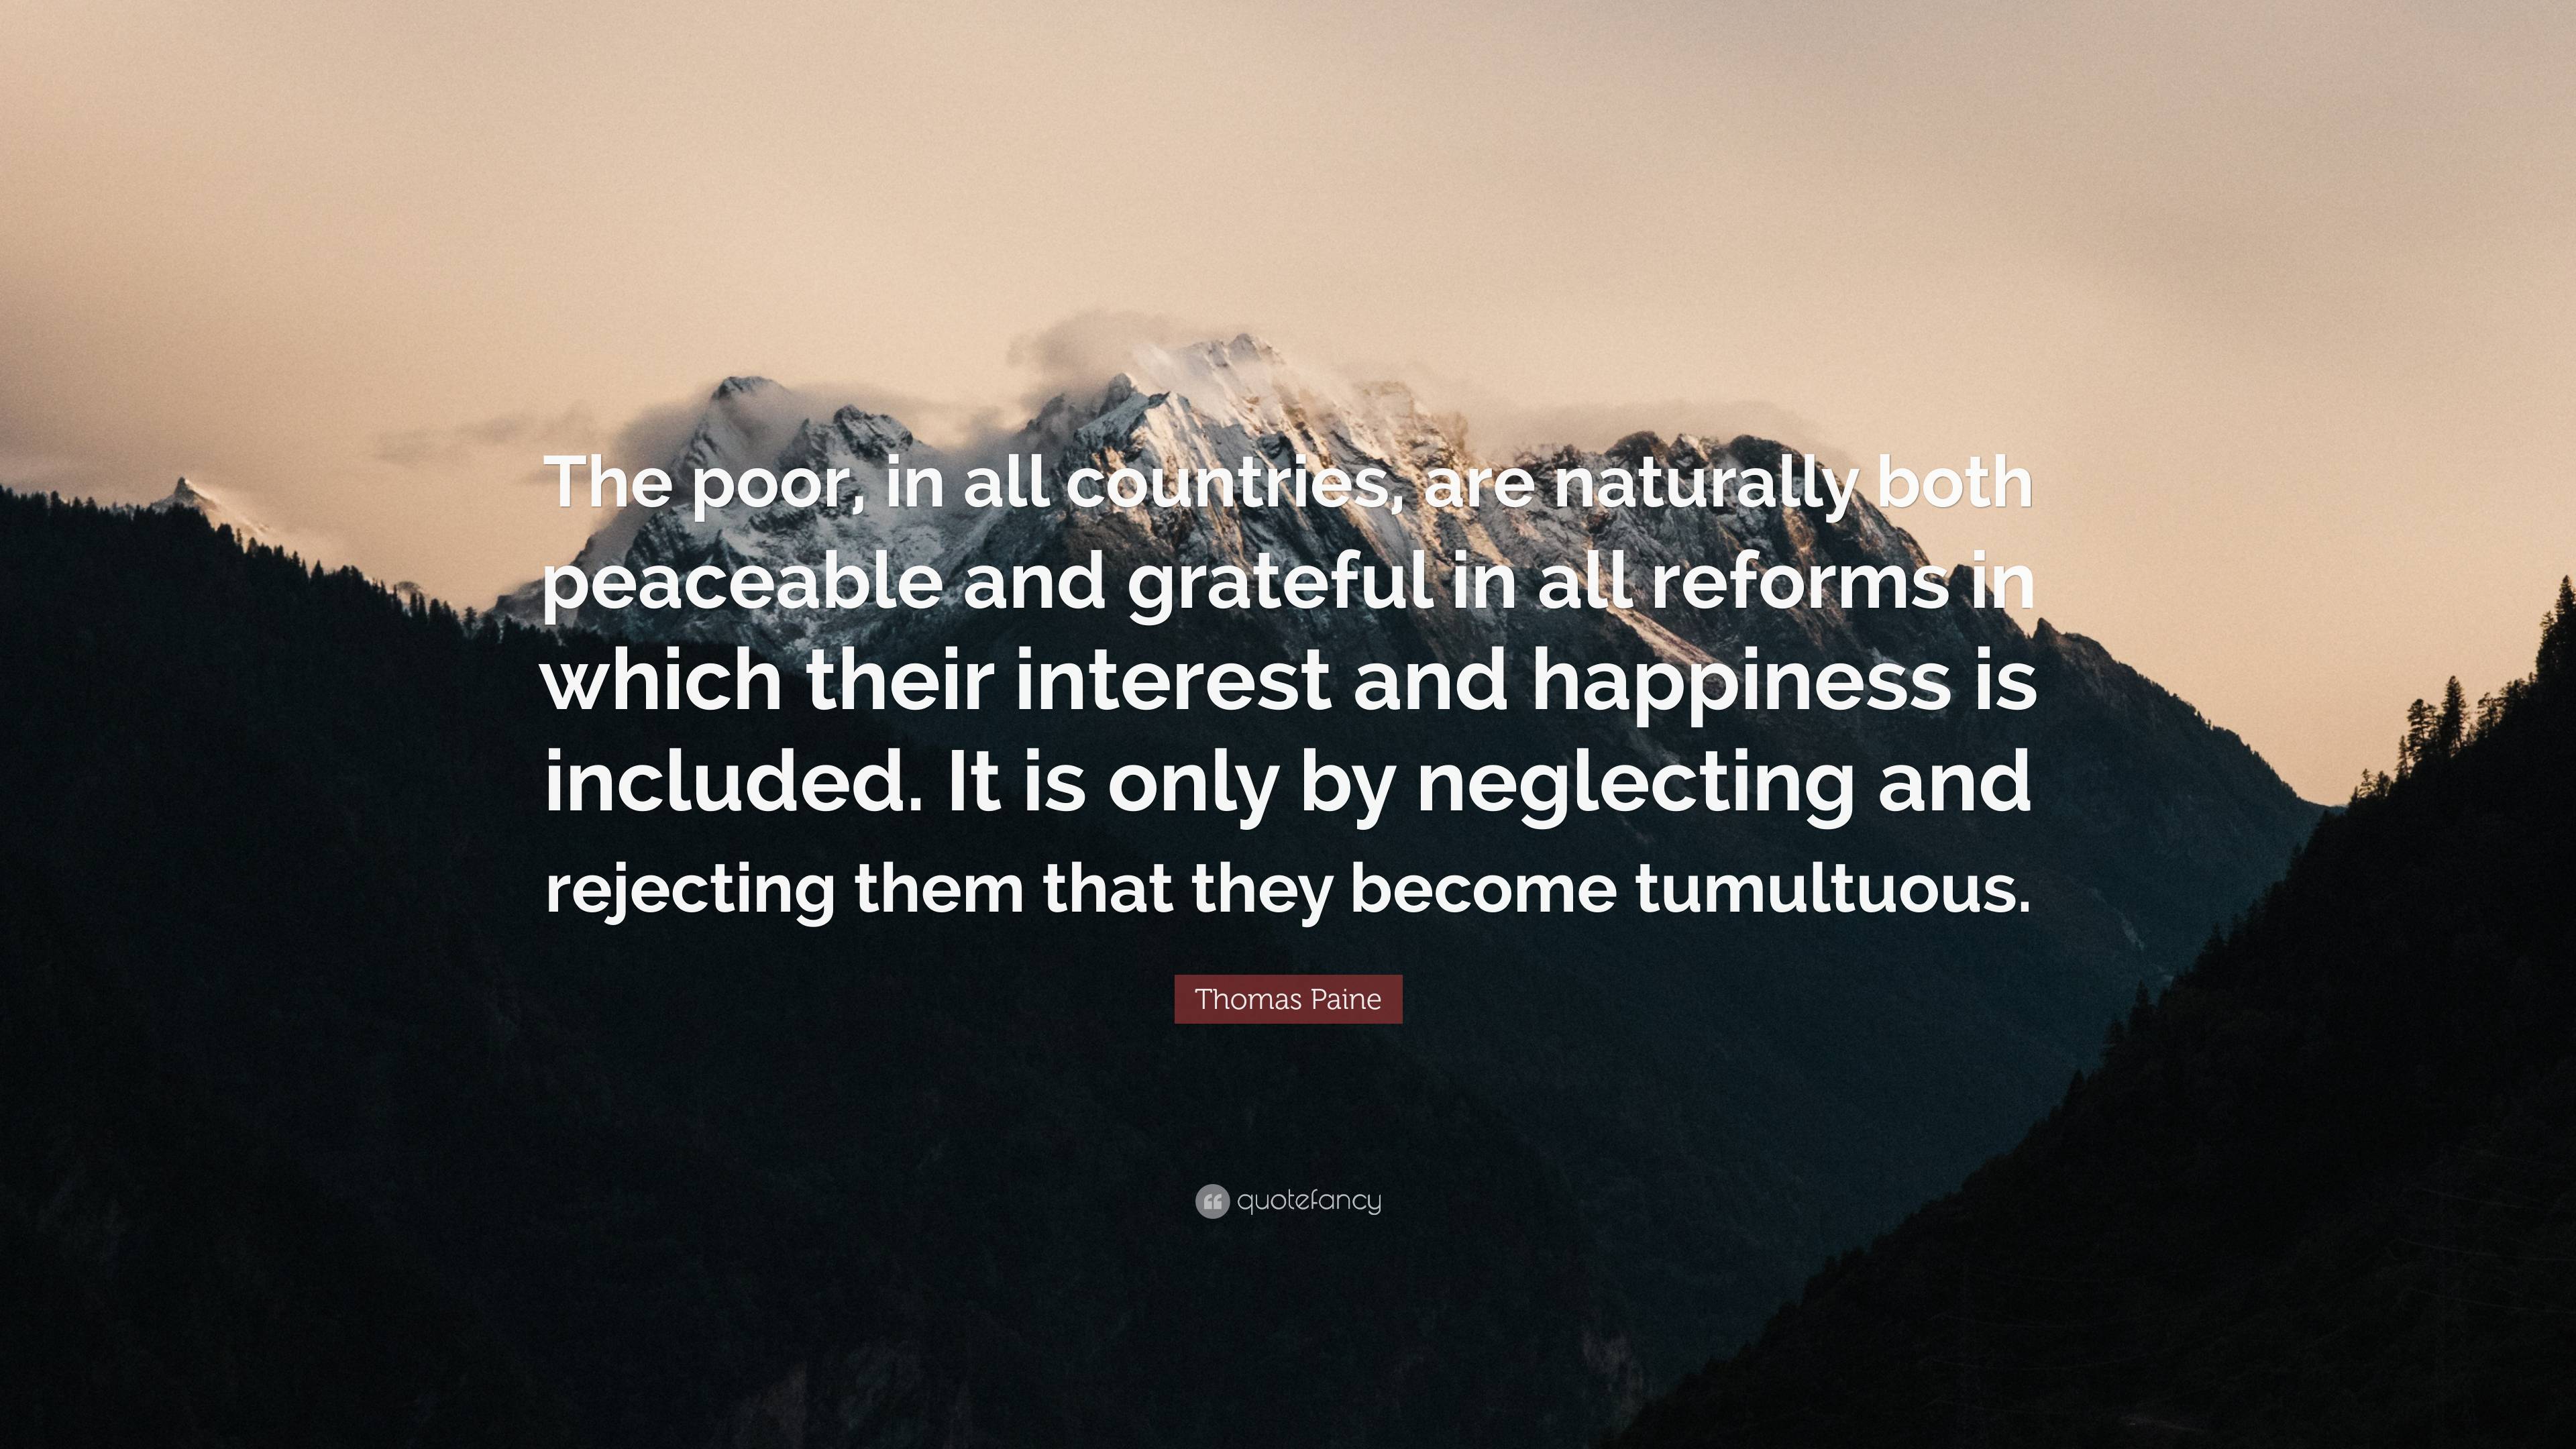 Thomas Paine Quote: “The poor, in all countries, are naturally both ...